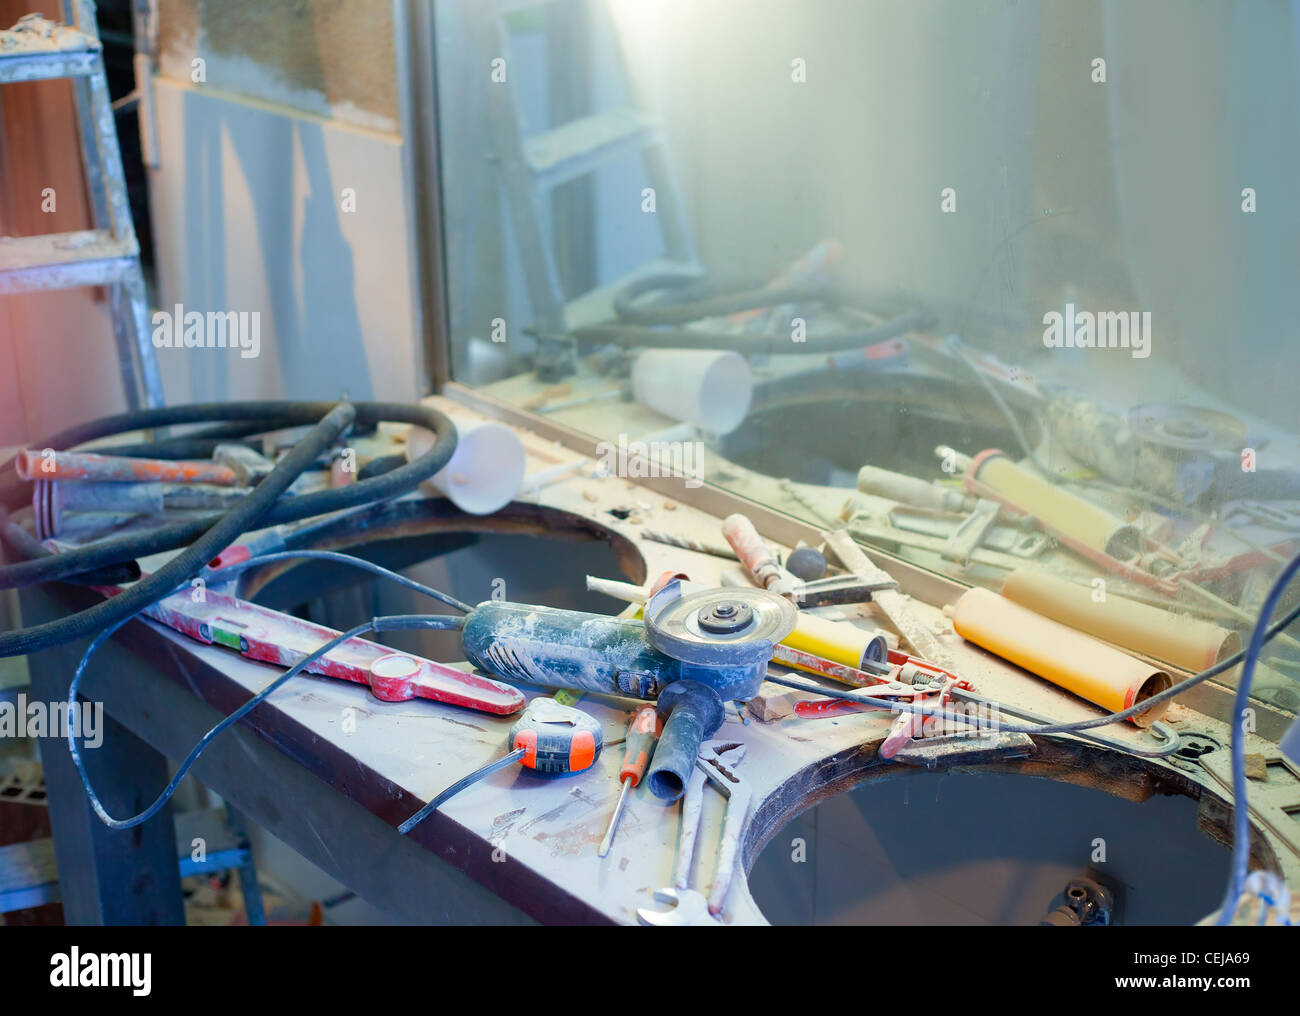 home improvement repair messy clutter with dusted tools handtools Stock Photo